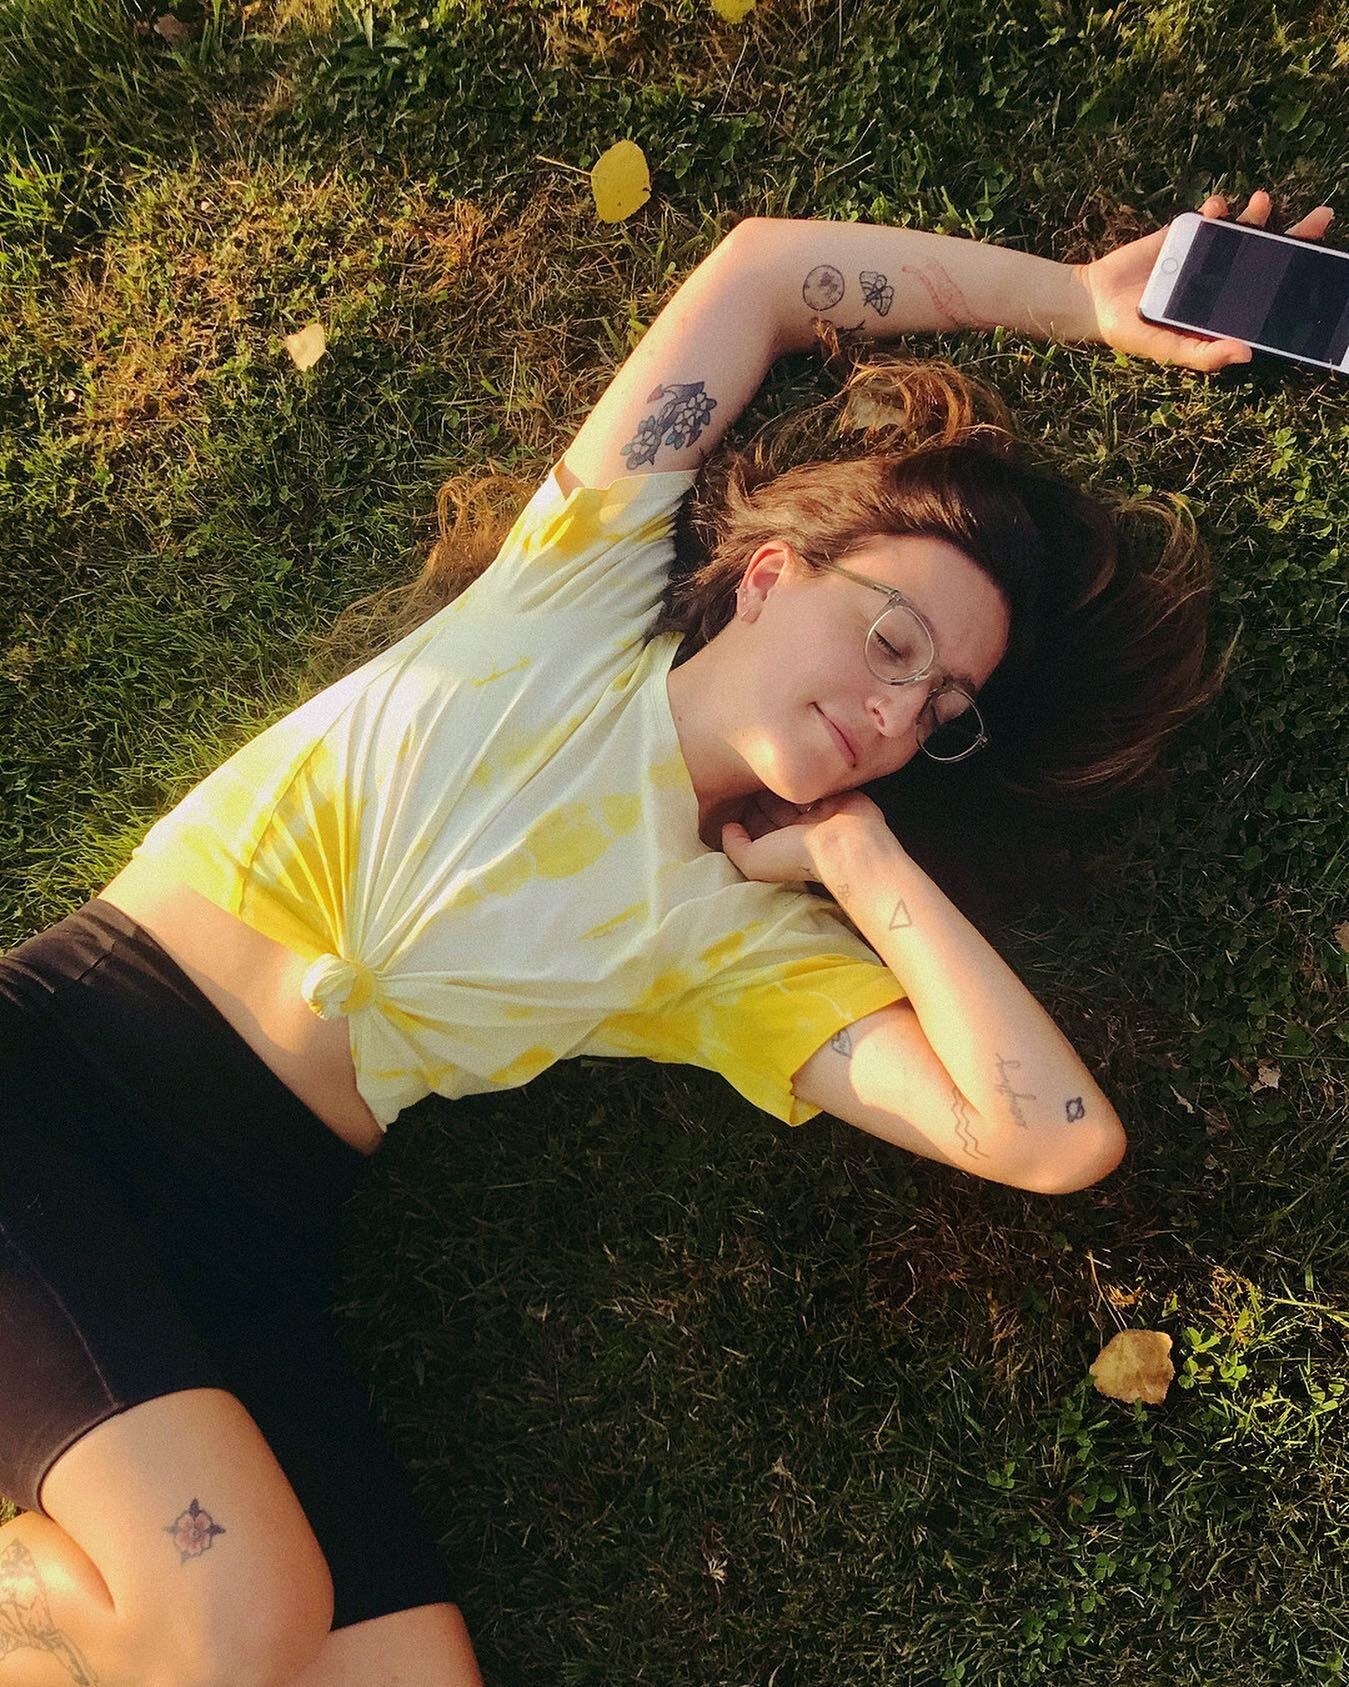 This is a photo from September. ☀️ I was crying in the yard / in the sun / for about an hour before Tommy came and snapped this photo. I don&rsquo;t think he knew I&rsquo;d been crying, staring into my phone thinking about all of the things I was mis